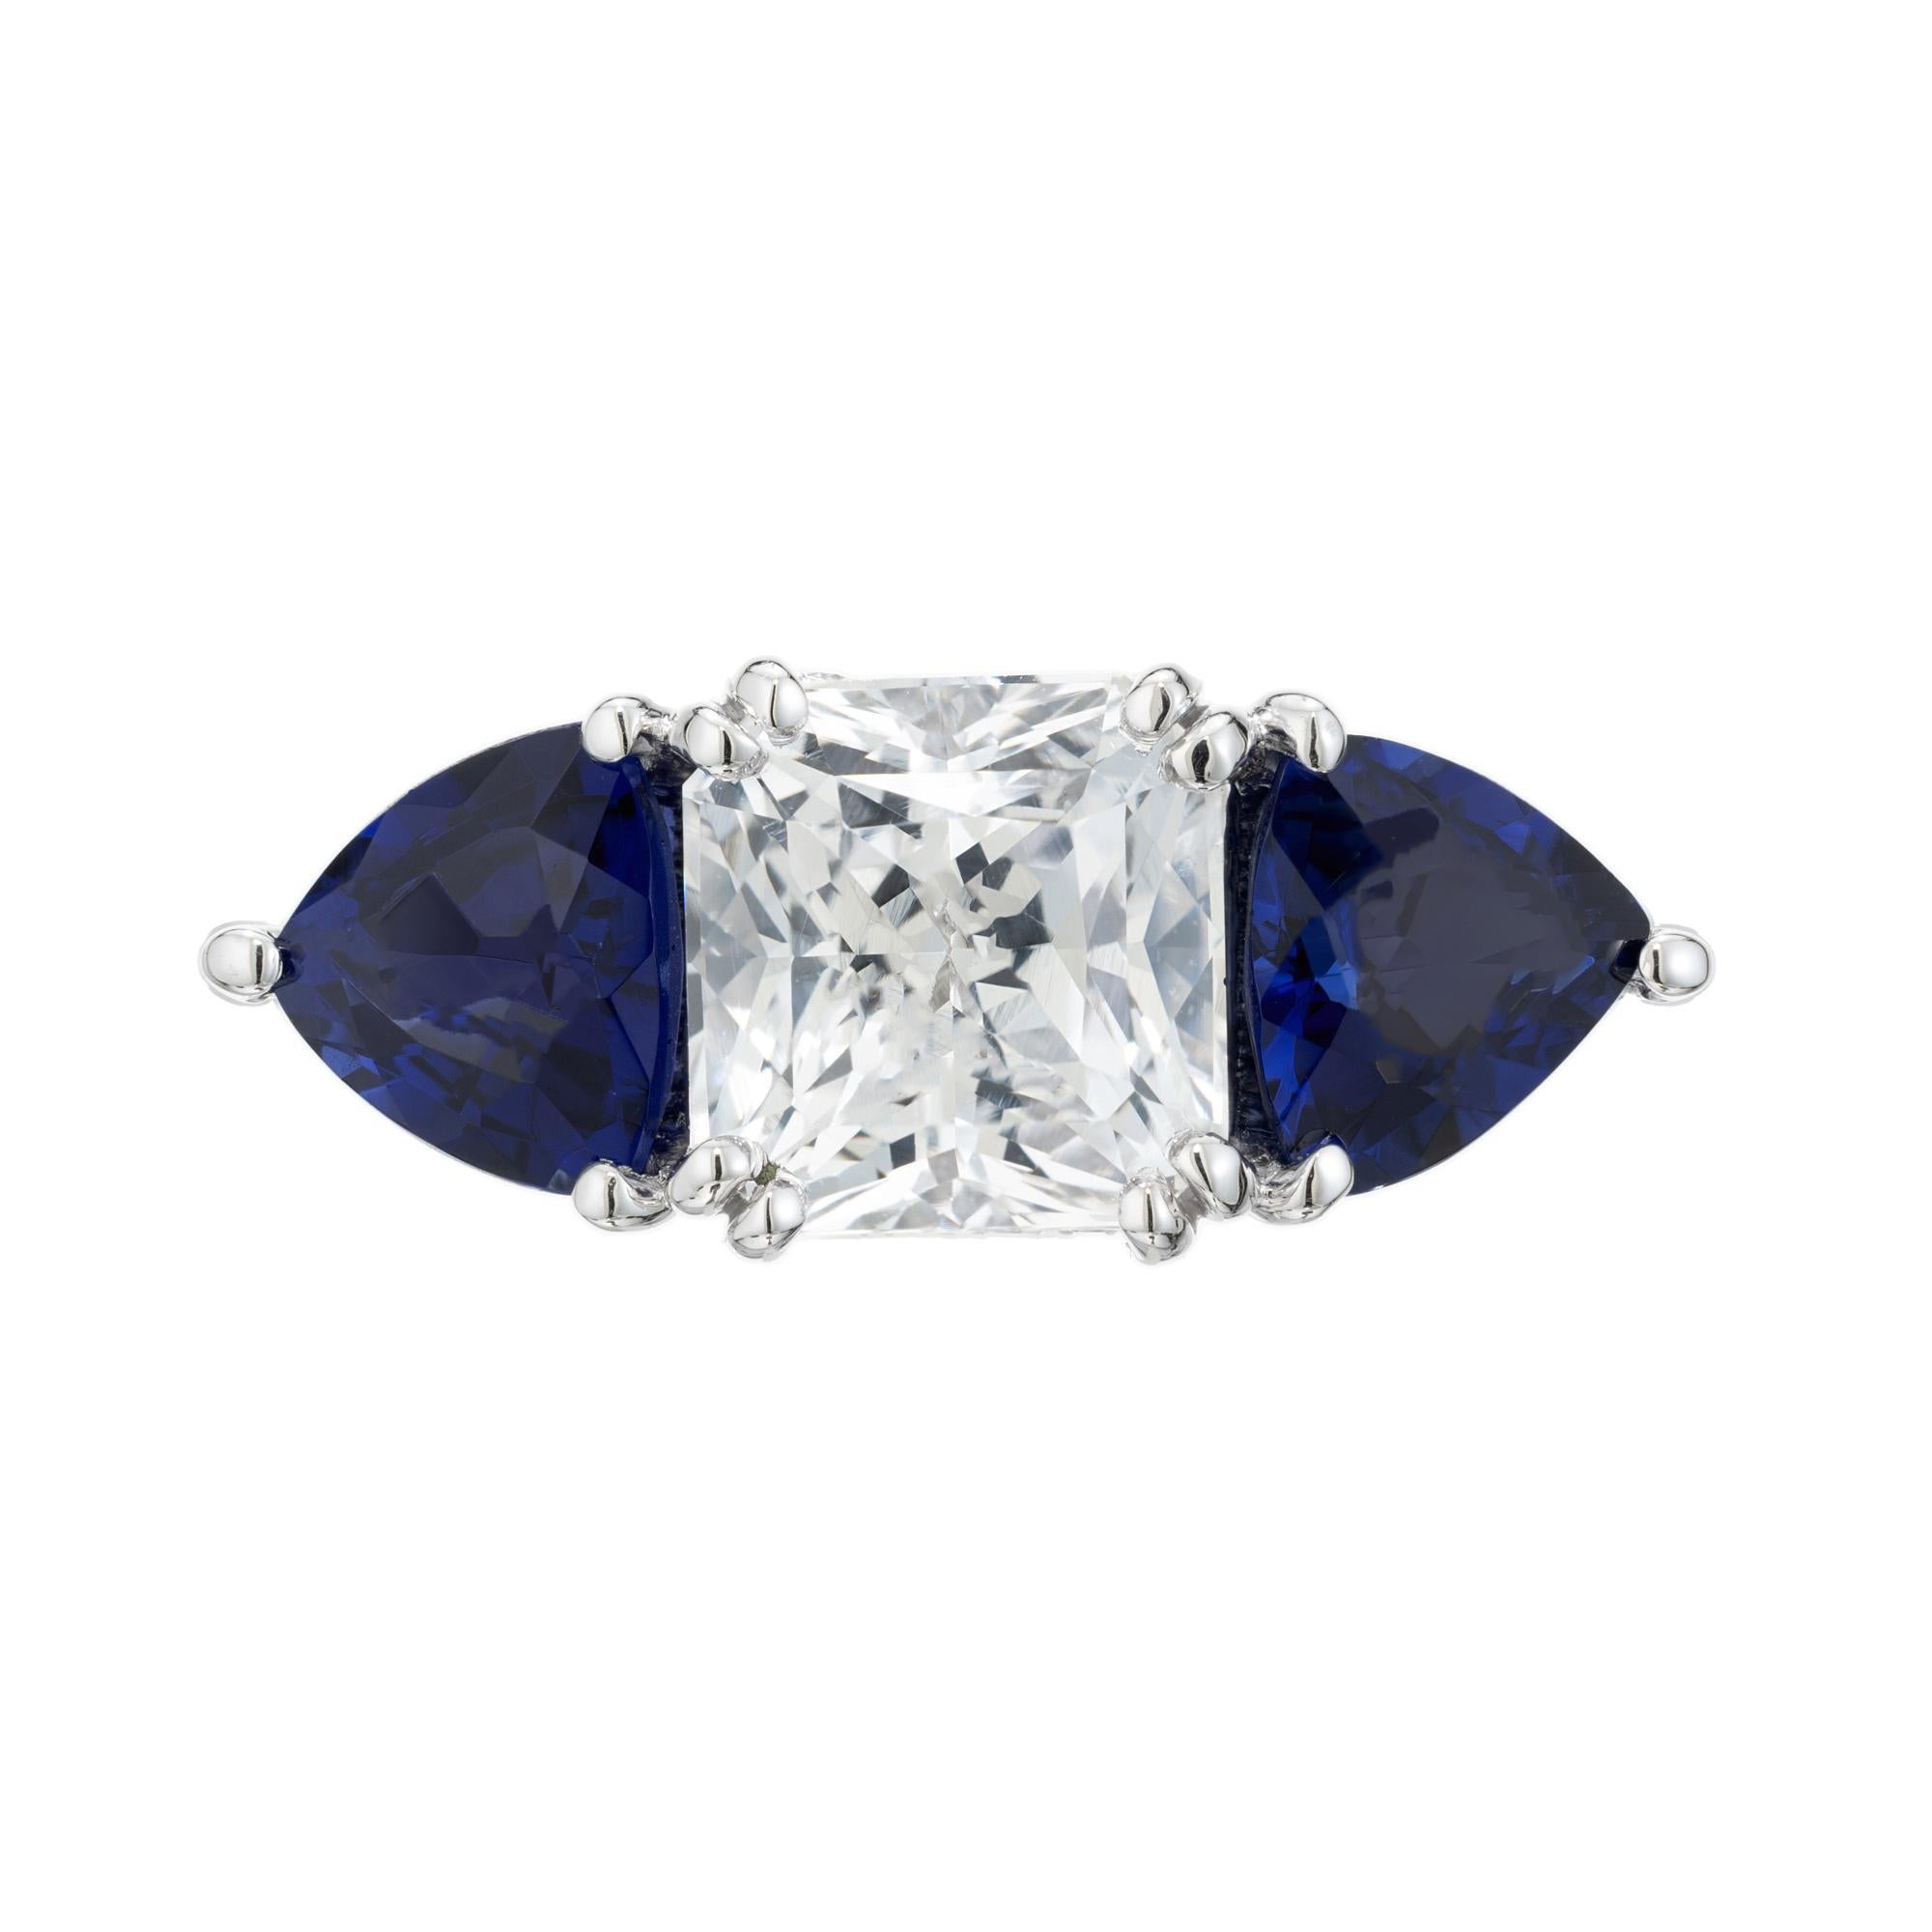 One of a kind sapphire and diamond engagement ring. This ring features a GIA certified 2.22ct octagonal white sapphire center stone, mounted in a platinum three-stone setting accented with a triangular cut blue sapphire on each side. The ring is